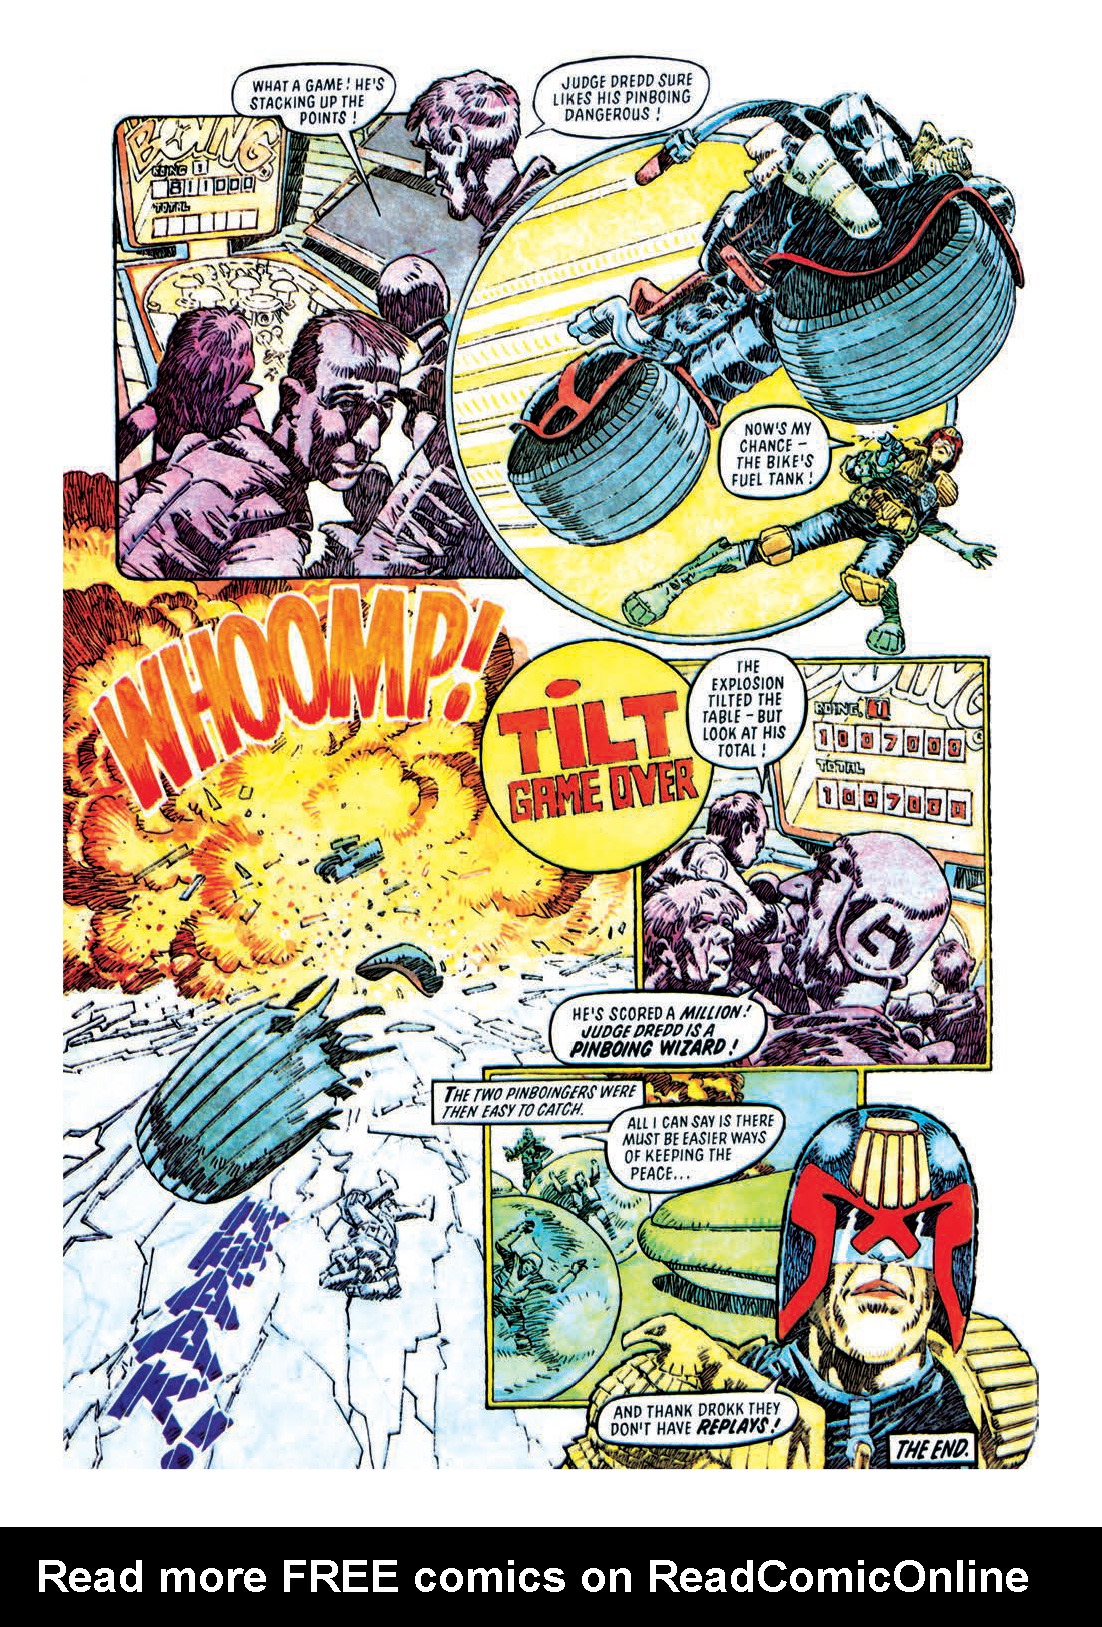 Read online Judge Dredd: The Restricted Files comic -  Issue # TPB 1 - 93